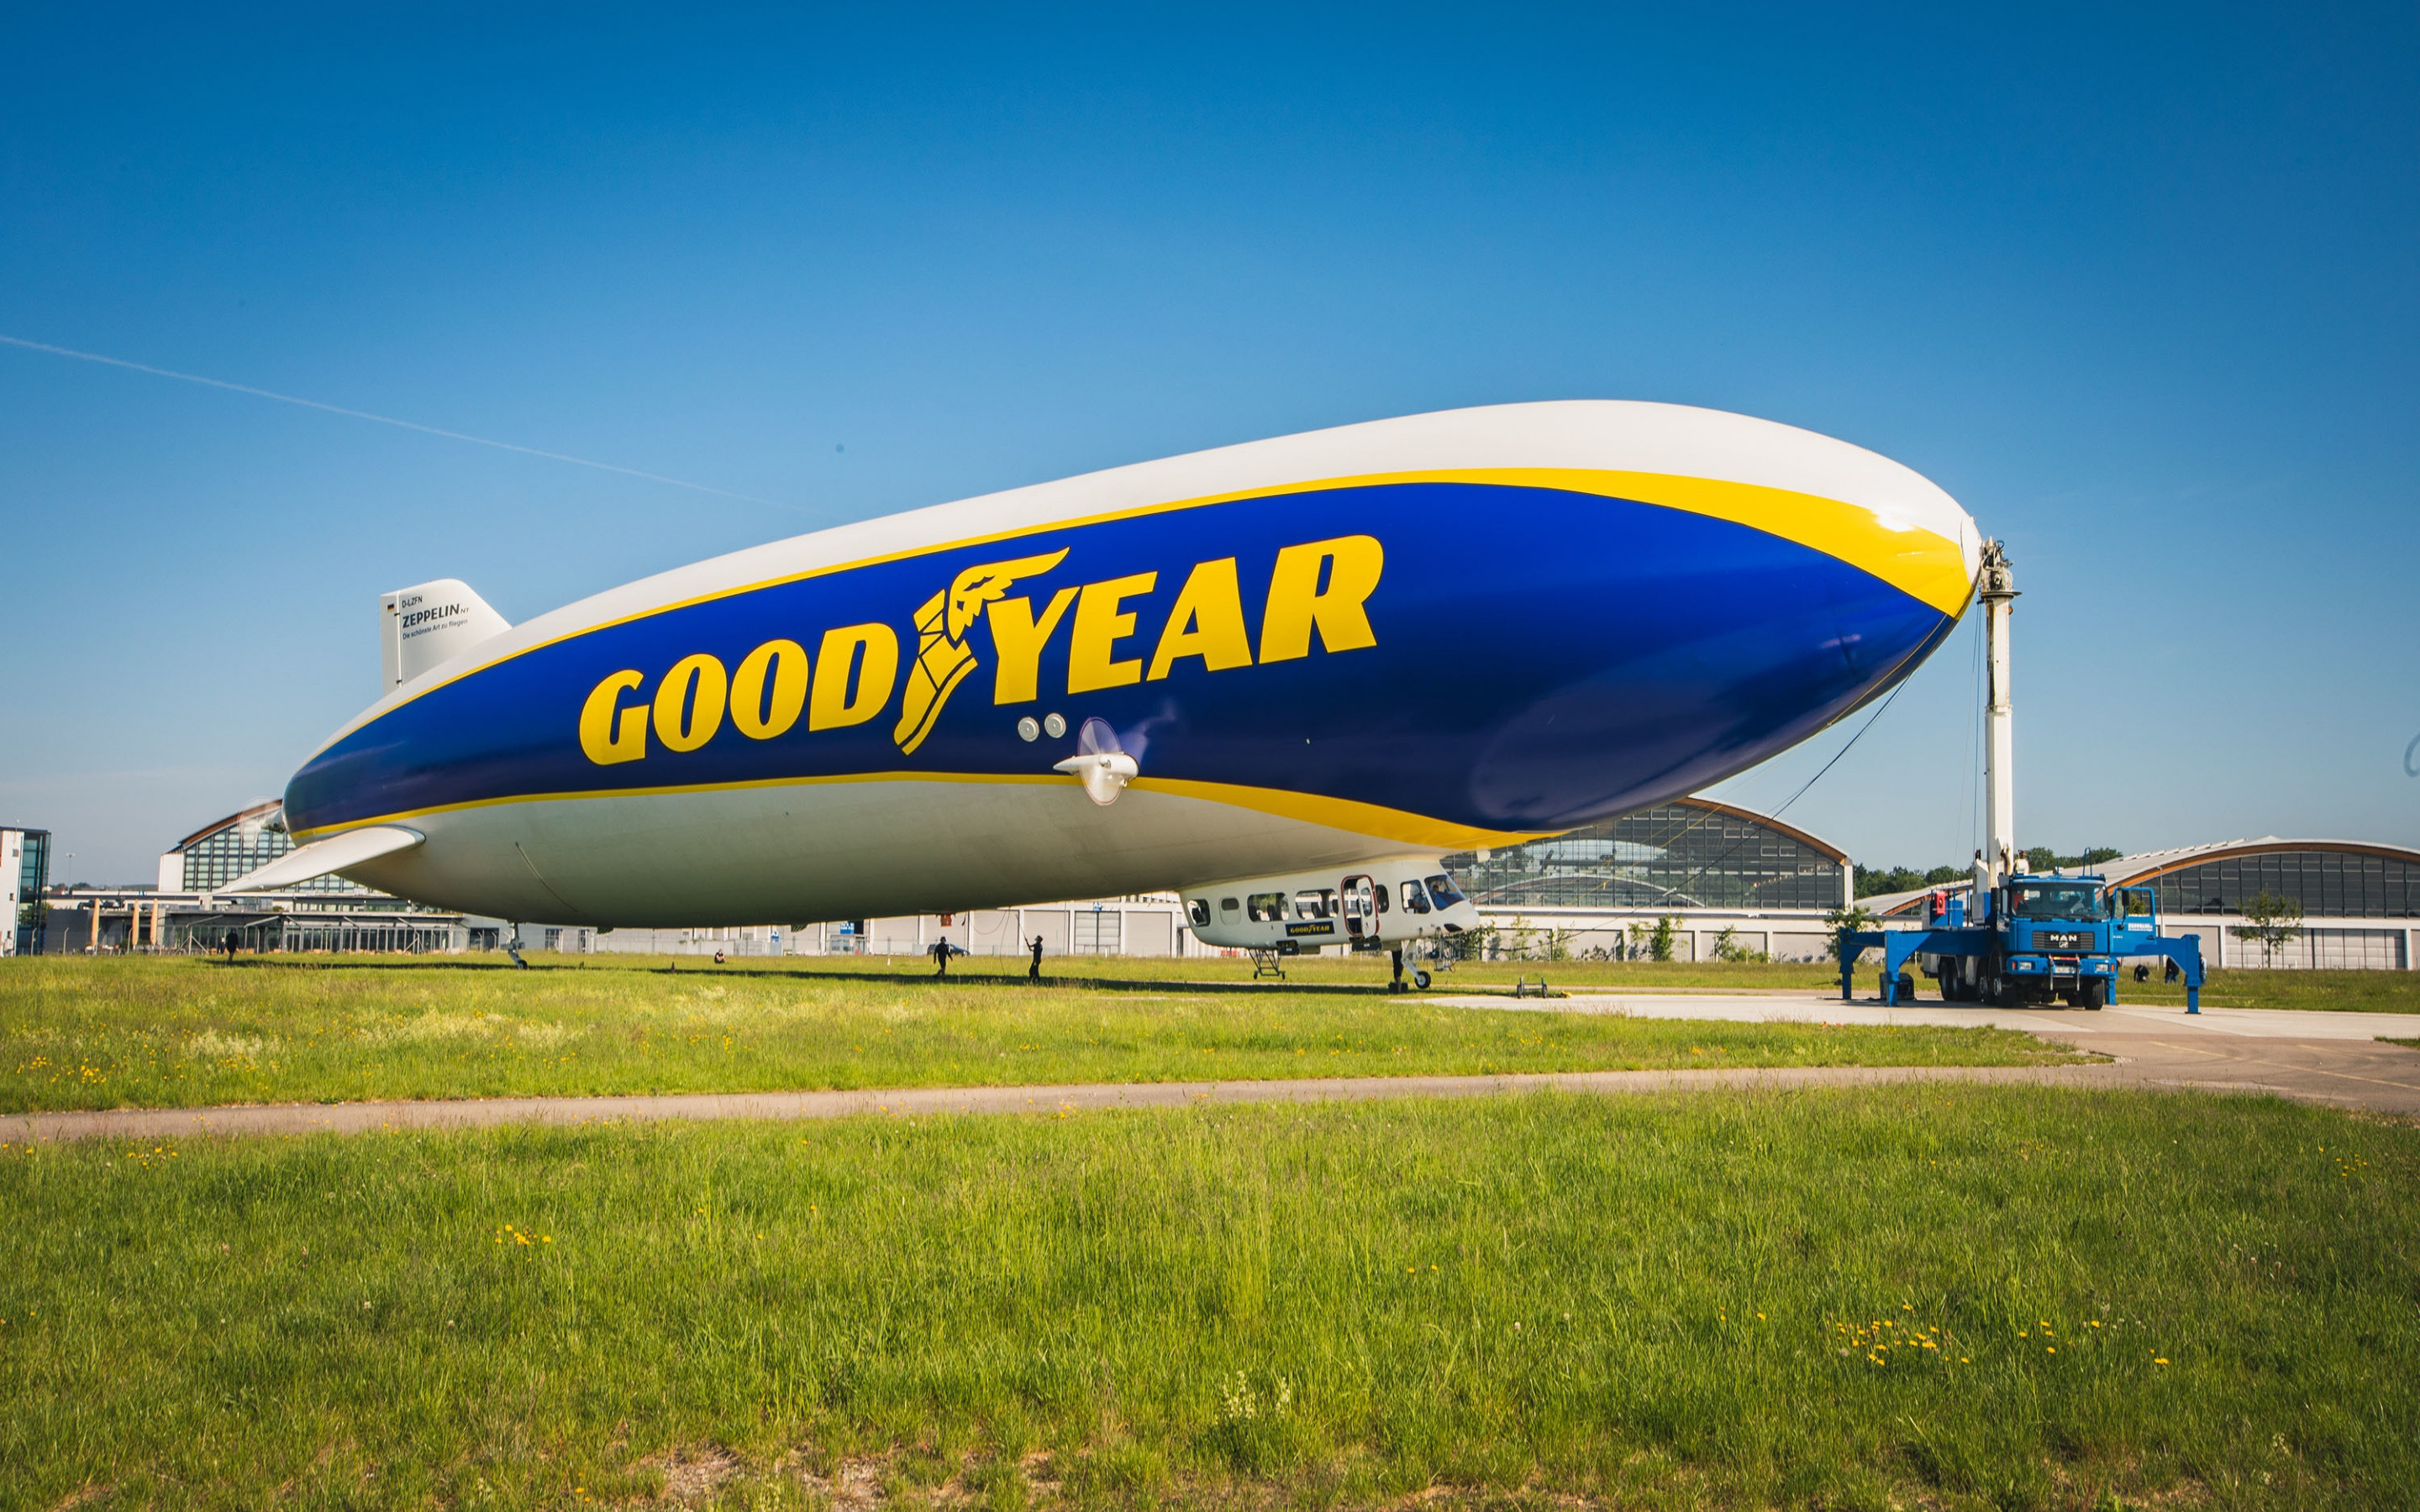 Goodyear blimp wallpapers, Air transport photography, High-quality pictures, The Goodyear Tire and Rubber Company, 2880x1800 HD Desktop